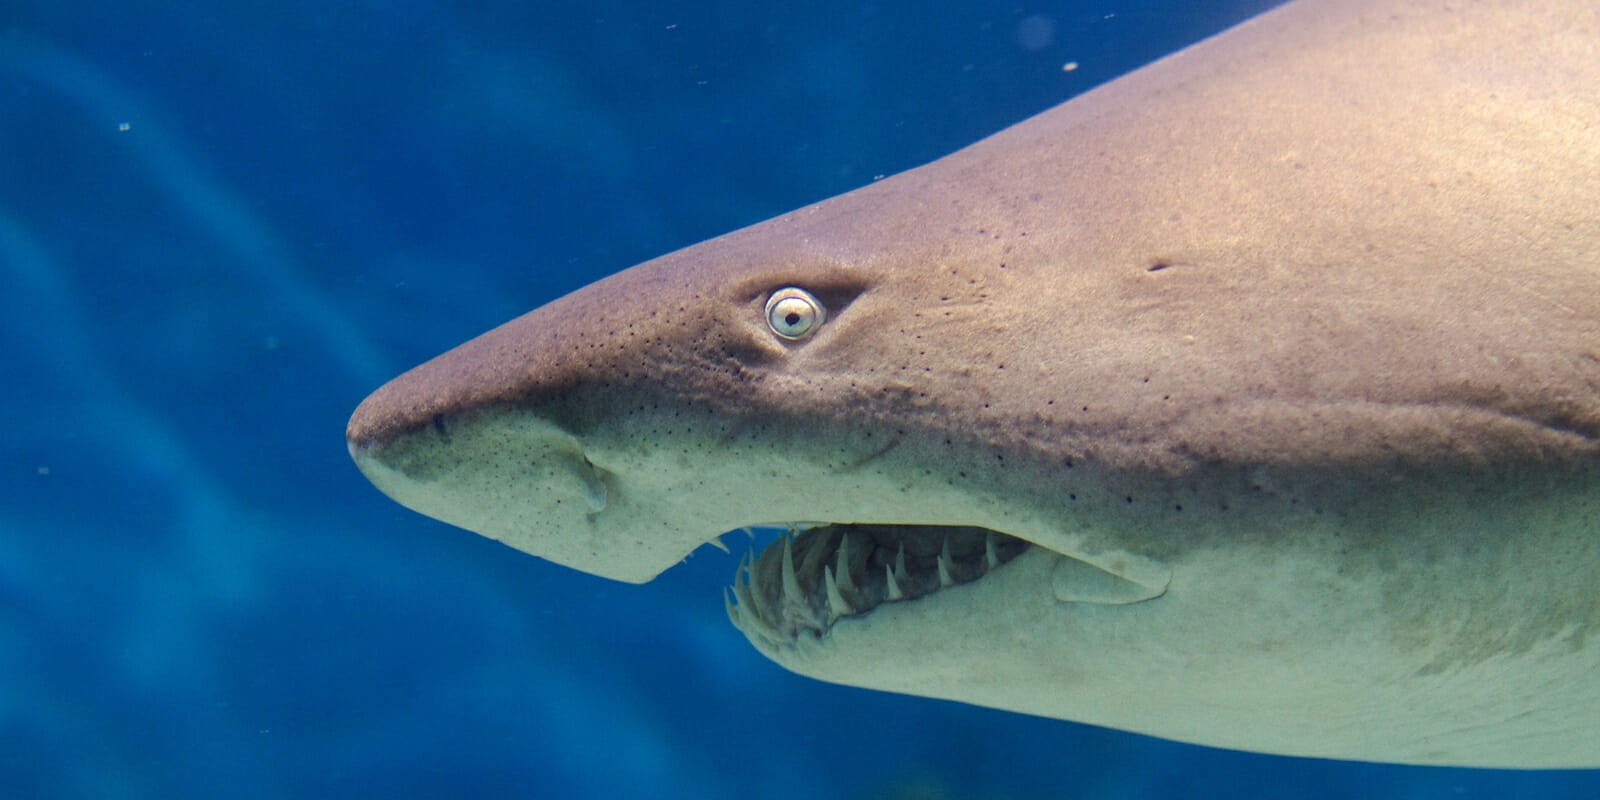 A nurse shark bit an Instagram model as she posed for a photo in the Bahamas.